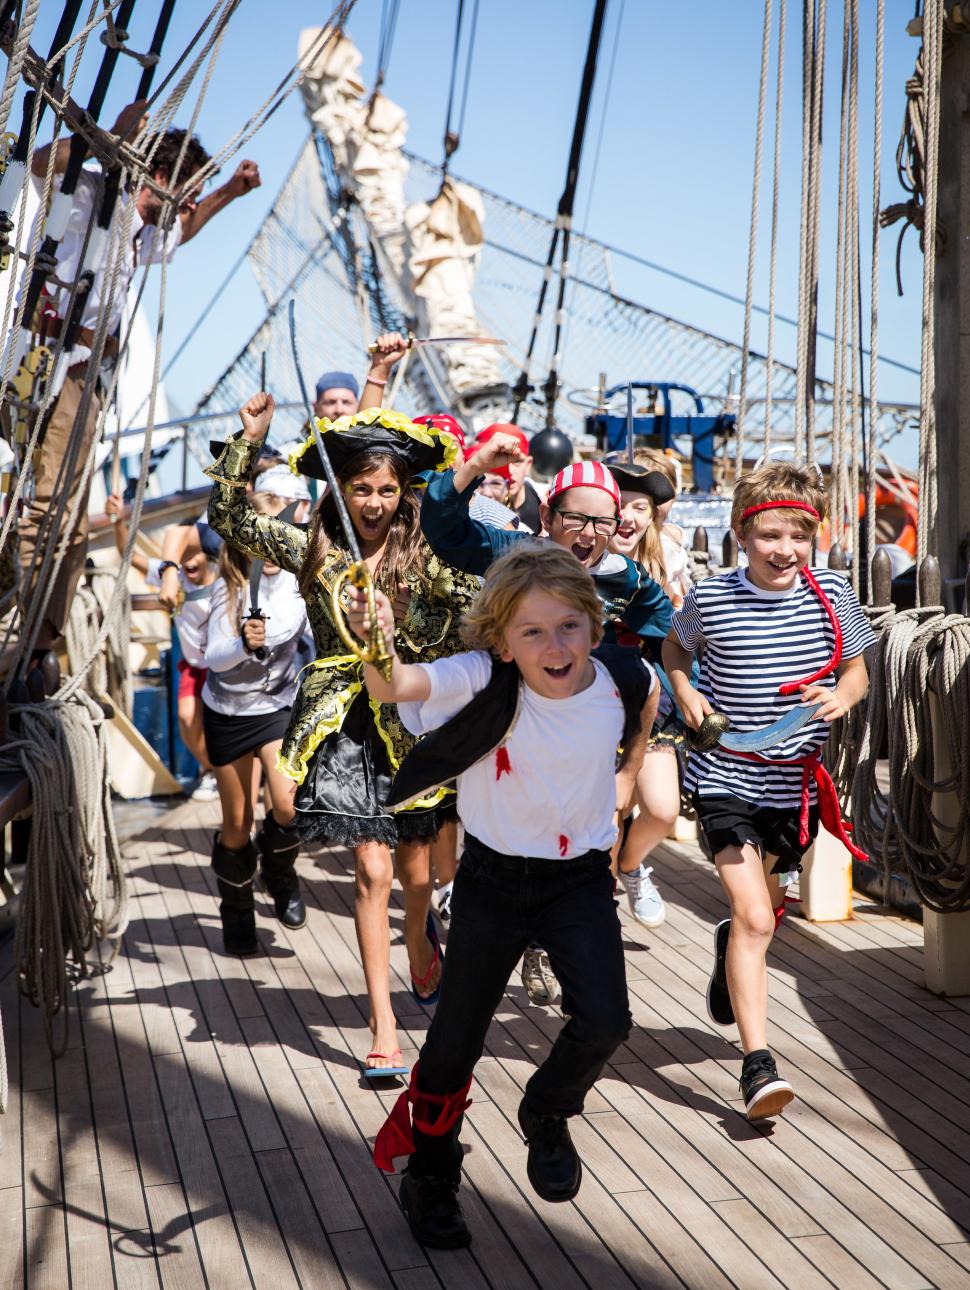 A group of children dressed as pirates rush along the desk of a sailing ship, shouting and waving toy swords